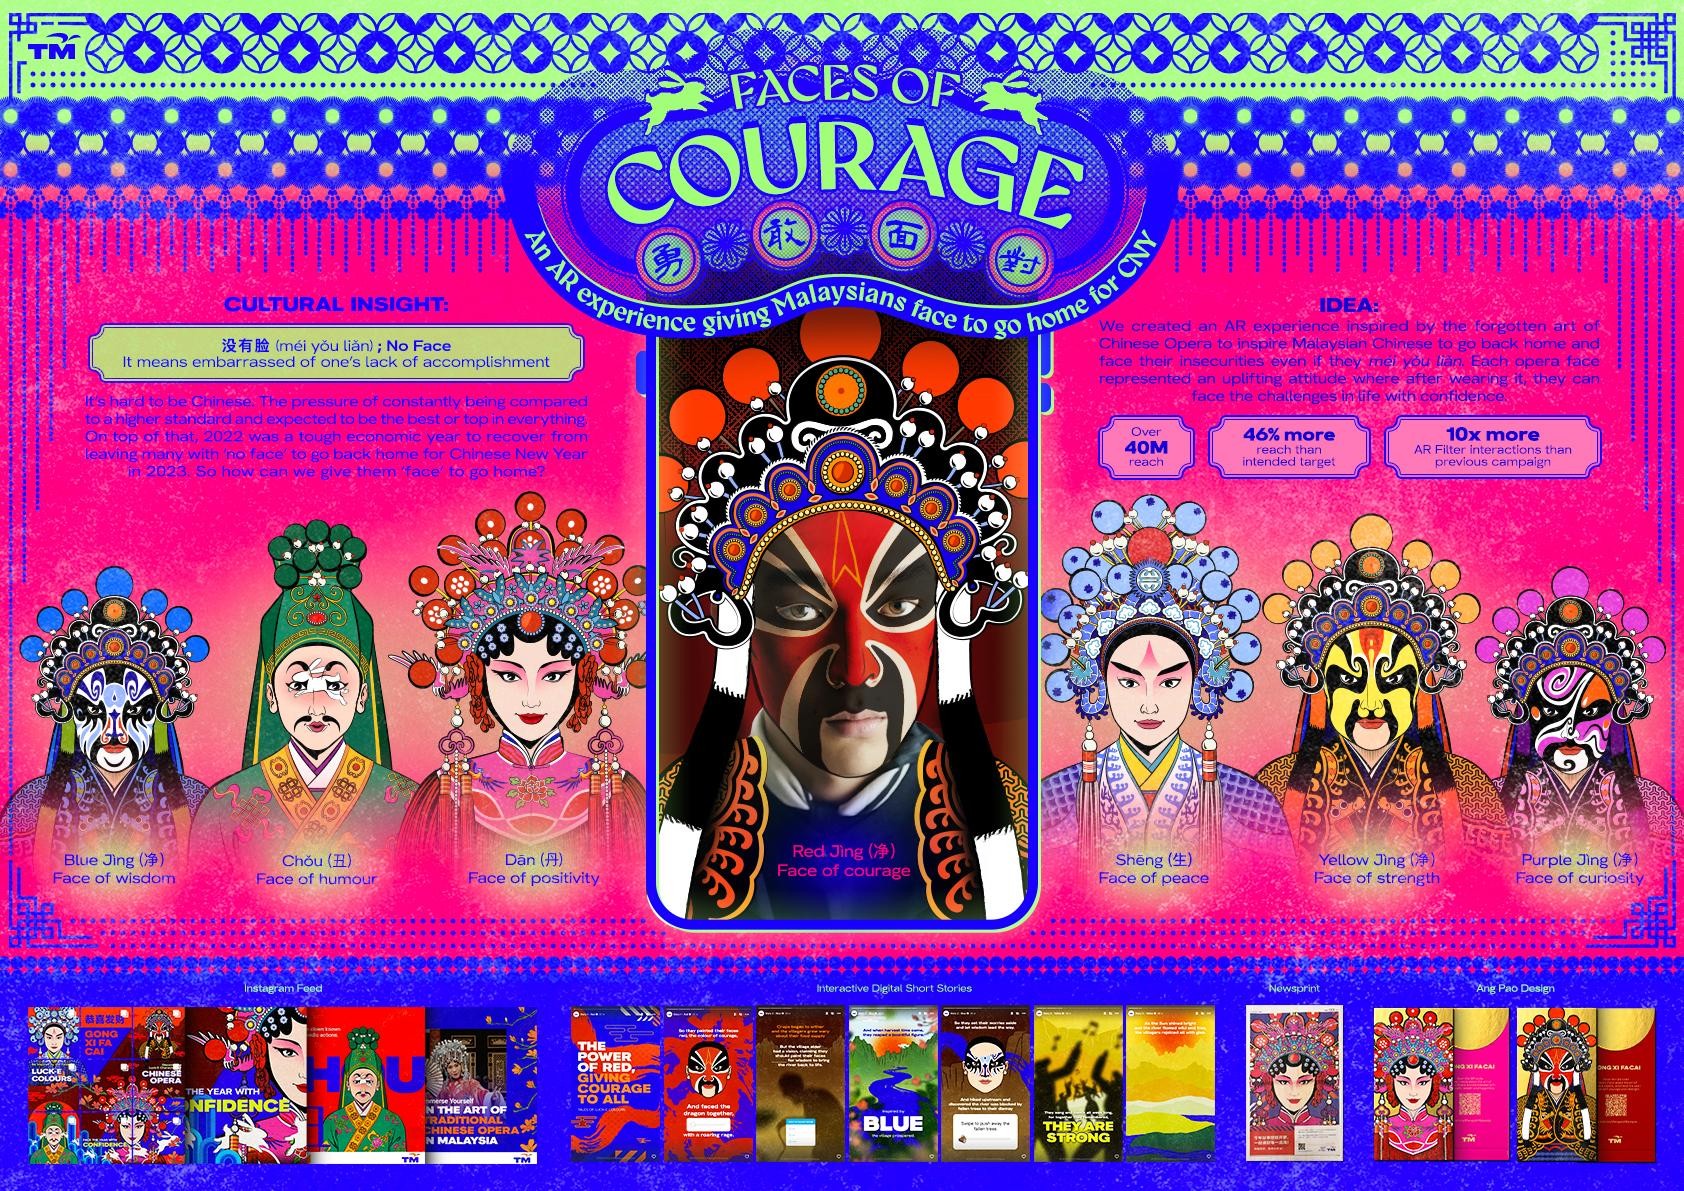 FACES OF COURAGE